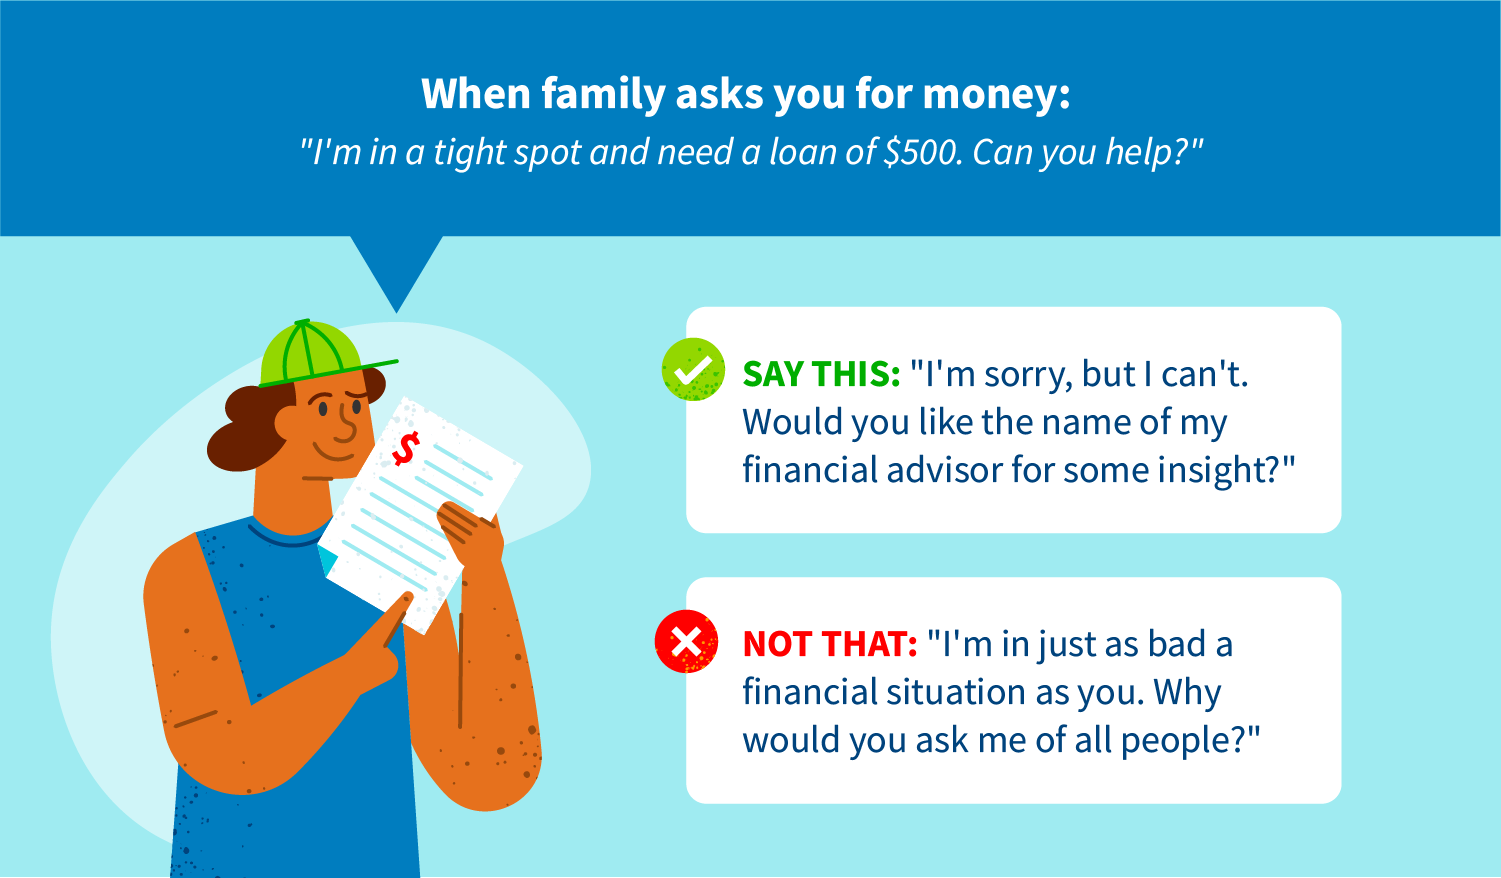 What to say when family asks you for money and you have to say no.